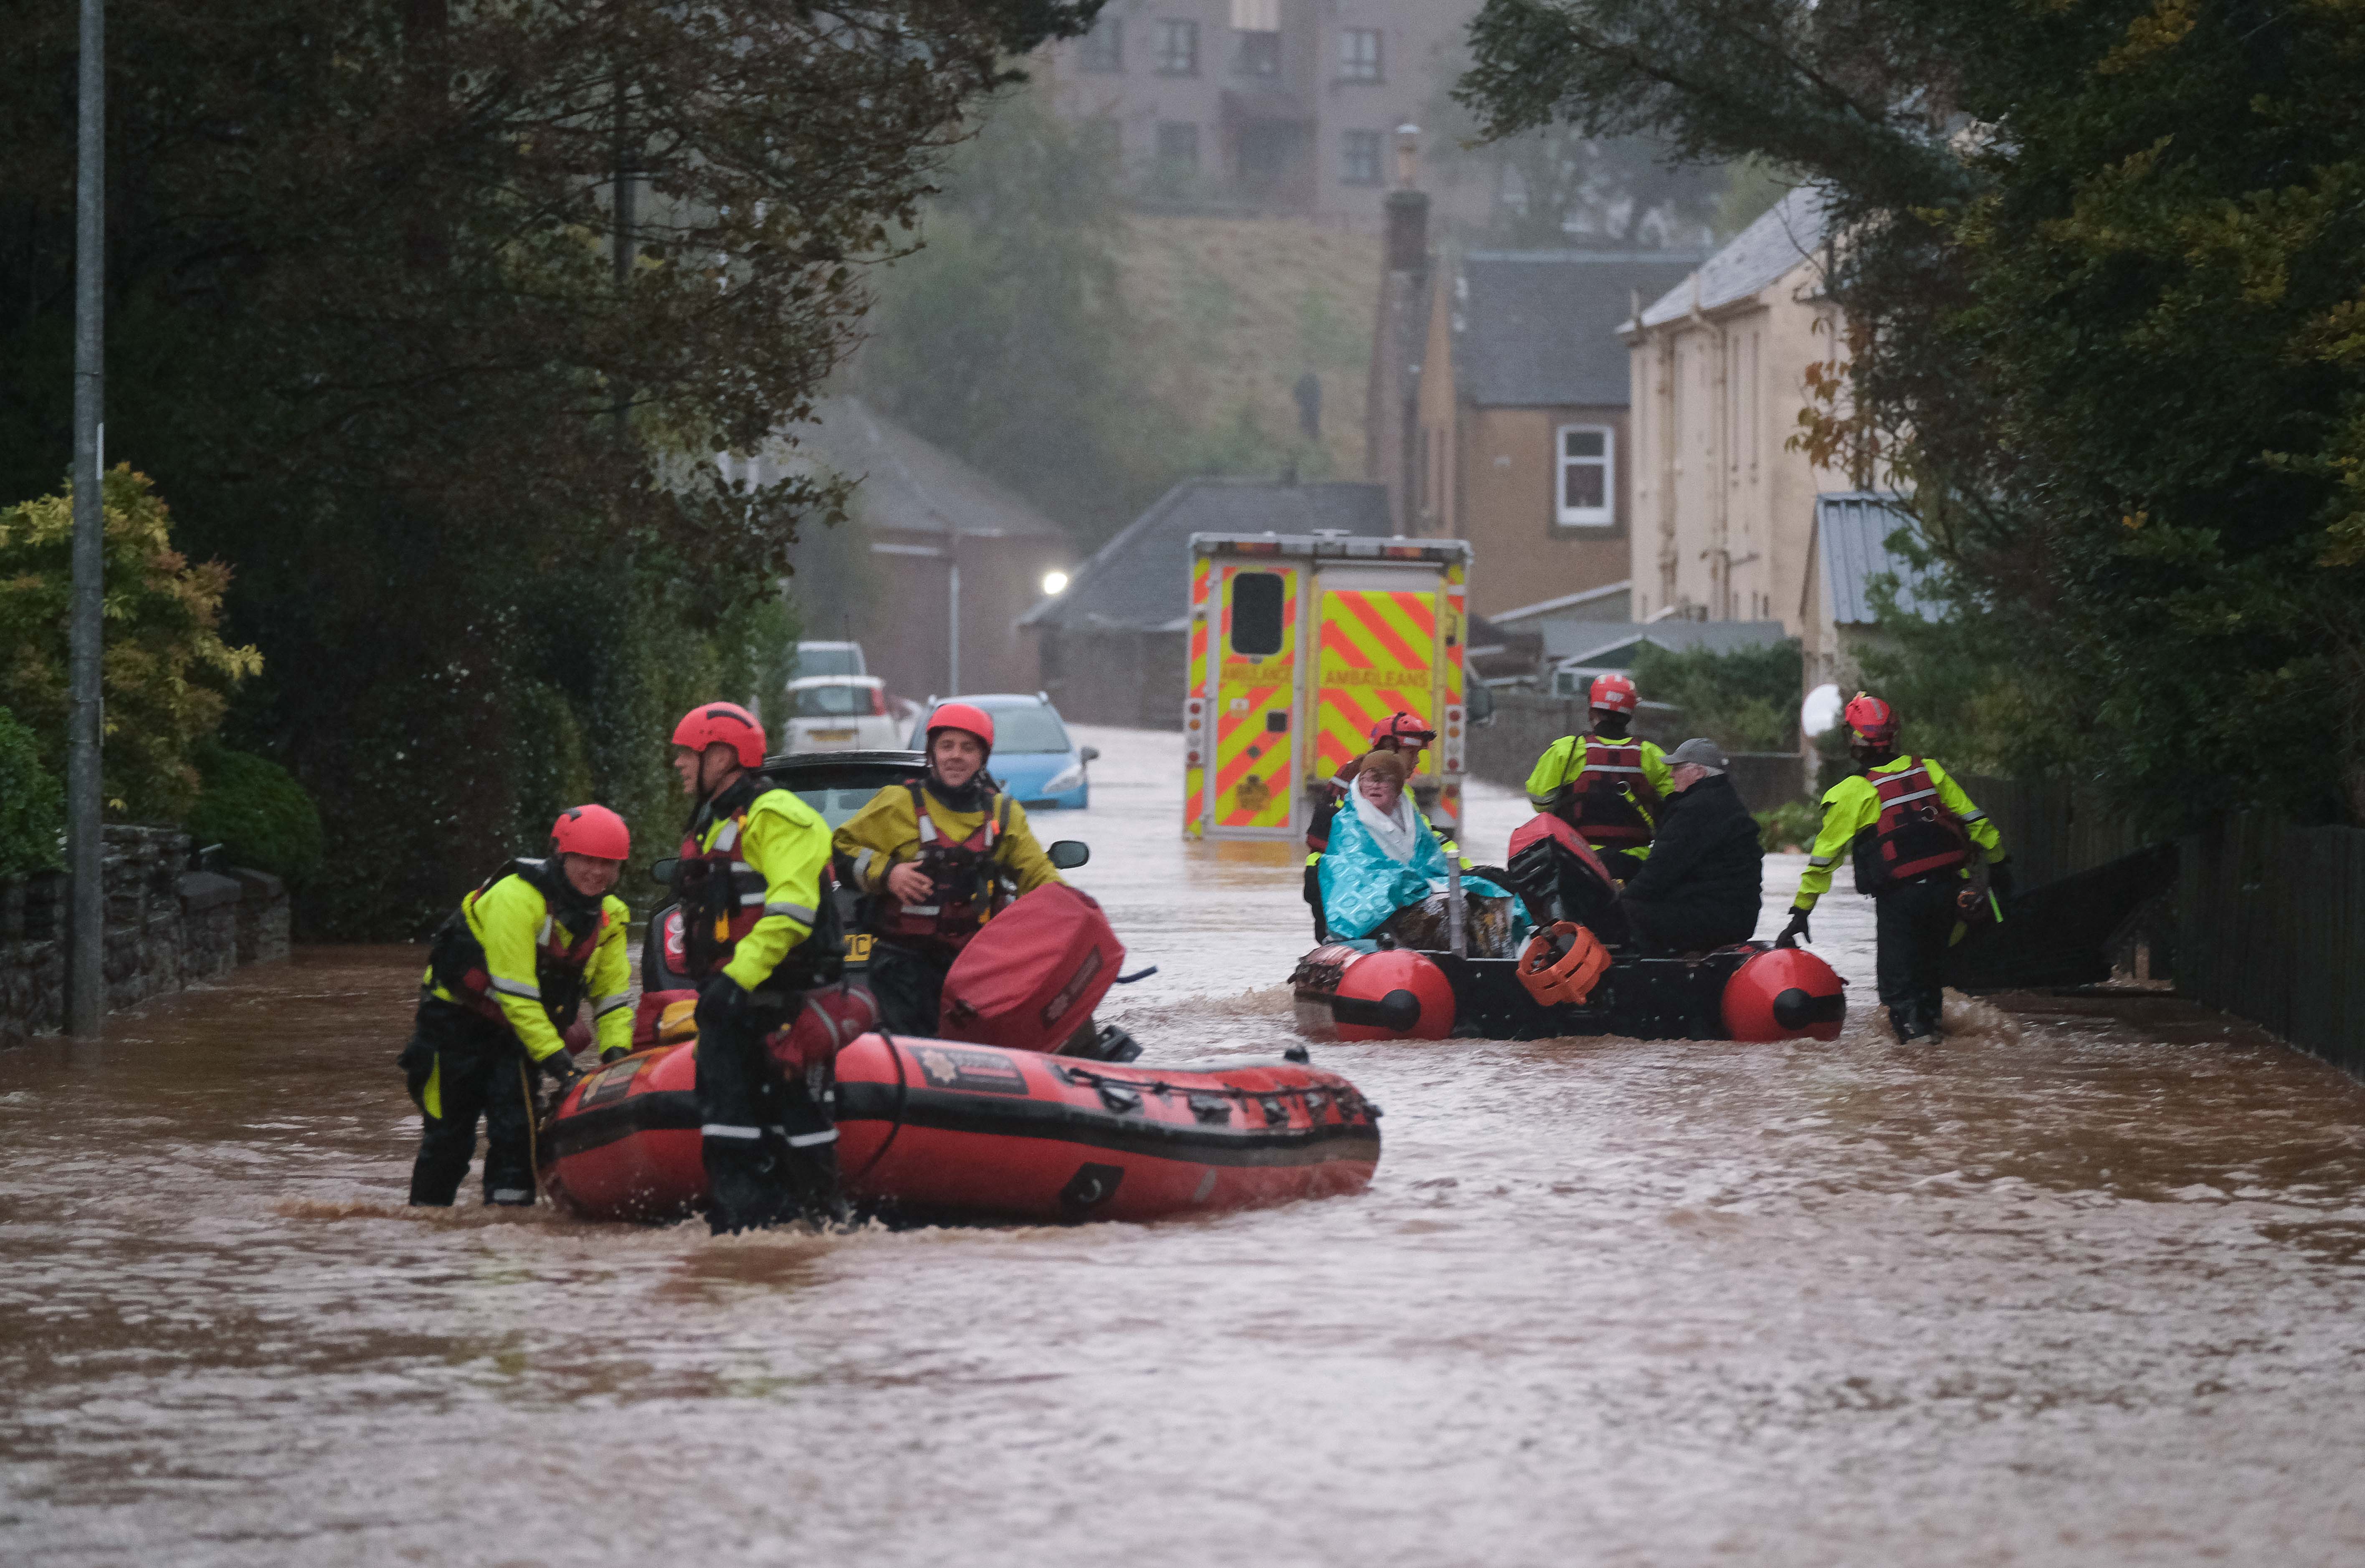 Lifeboats have been deployed in rescue operations in Brechin